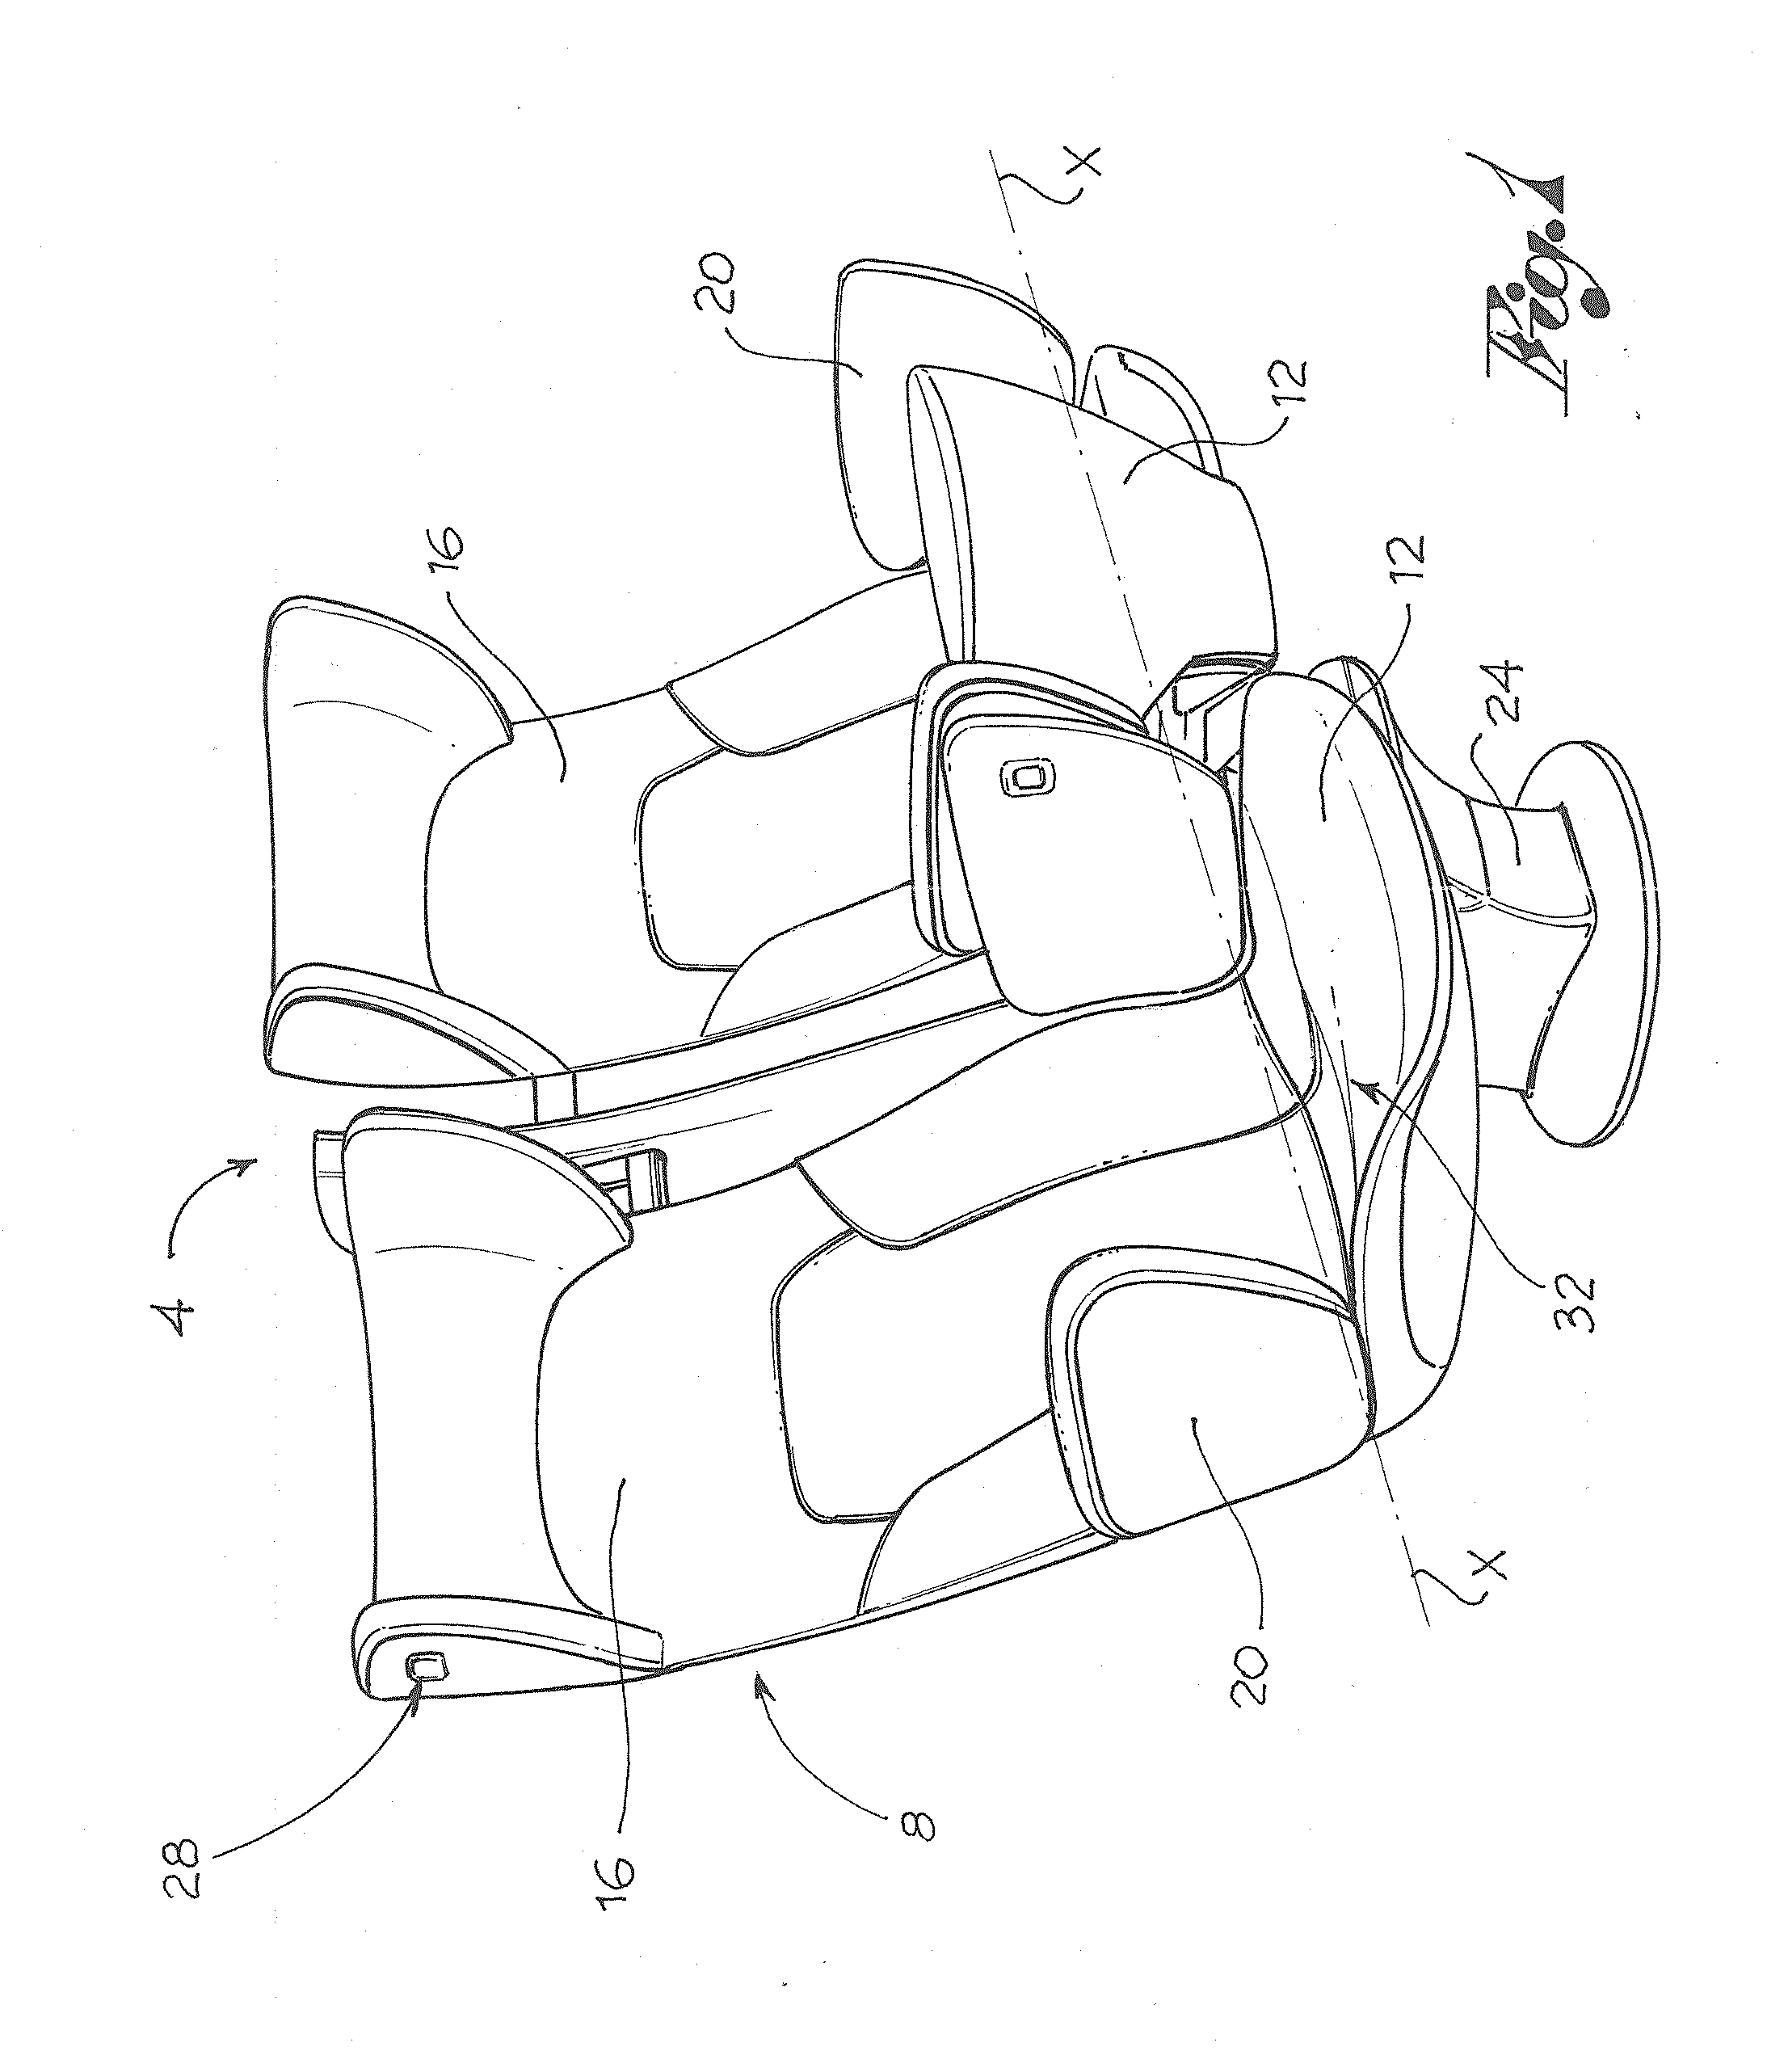 Seat, Operating and Control System of Seats, Method of Operating and Controlling Seats